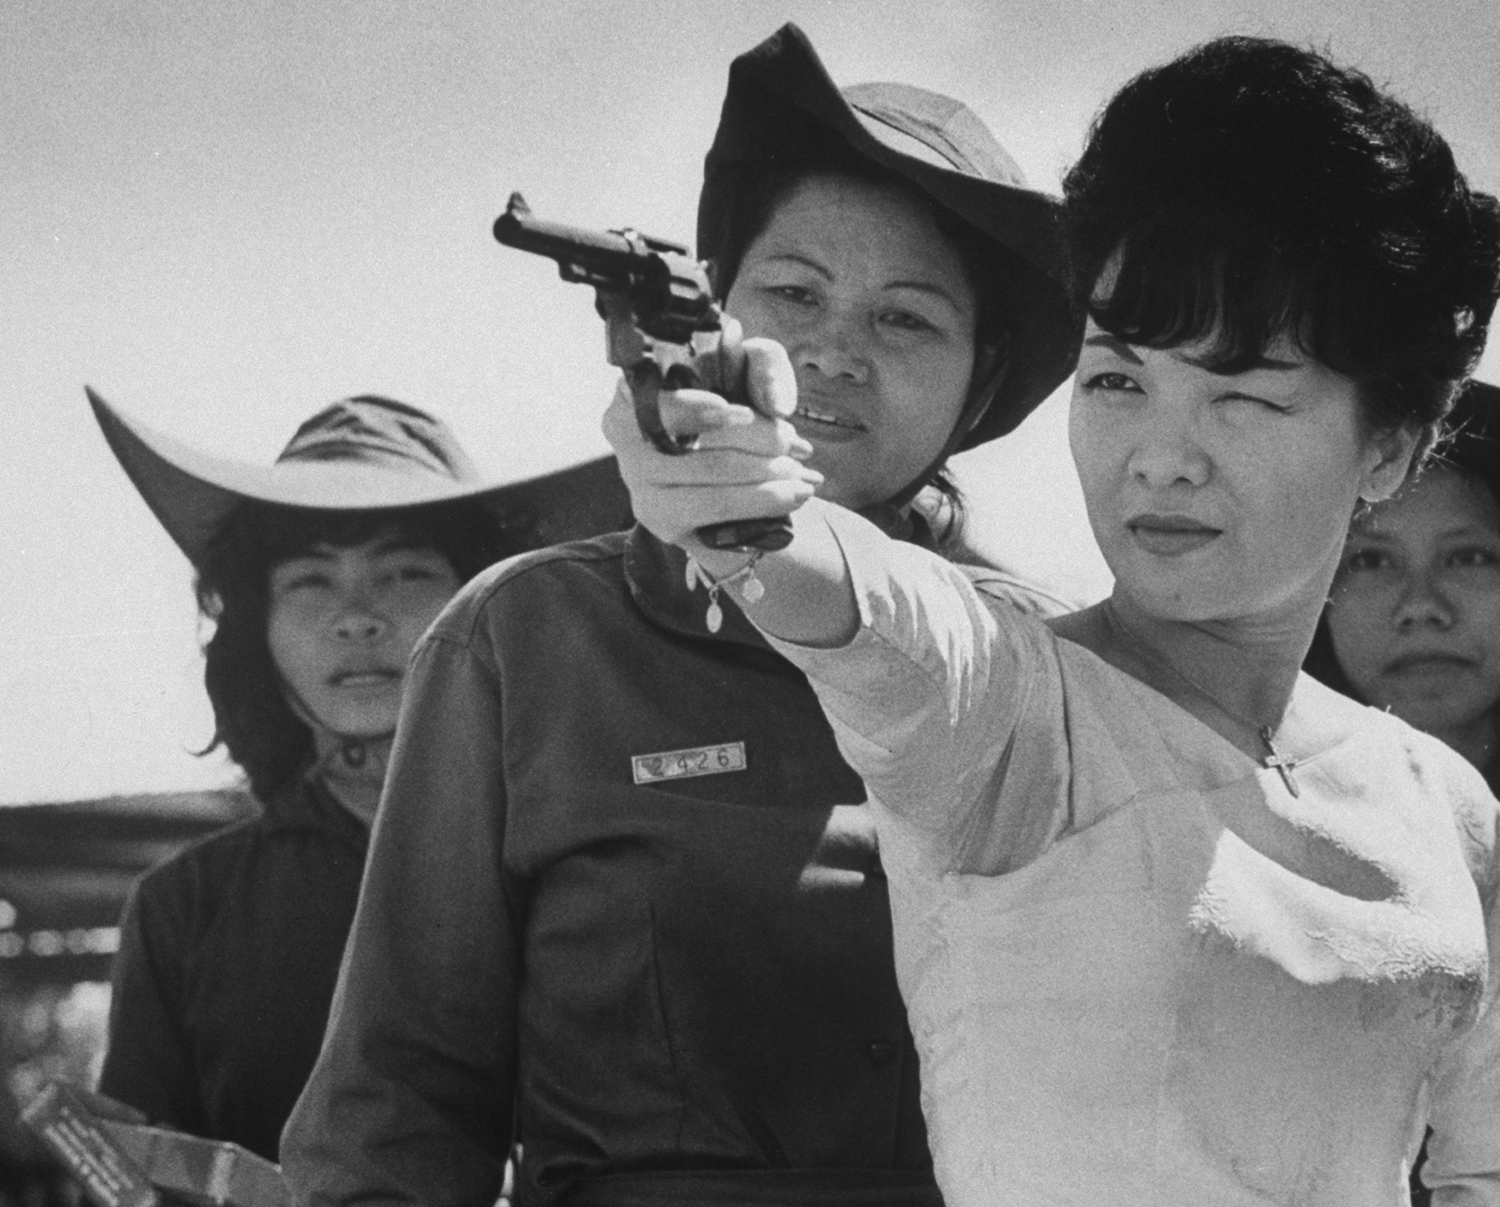 South Vietnam's Madame Nhu fires a pistol during a 1962 visit to an officer training session of the women's paramilitary force that she organized the year before.